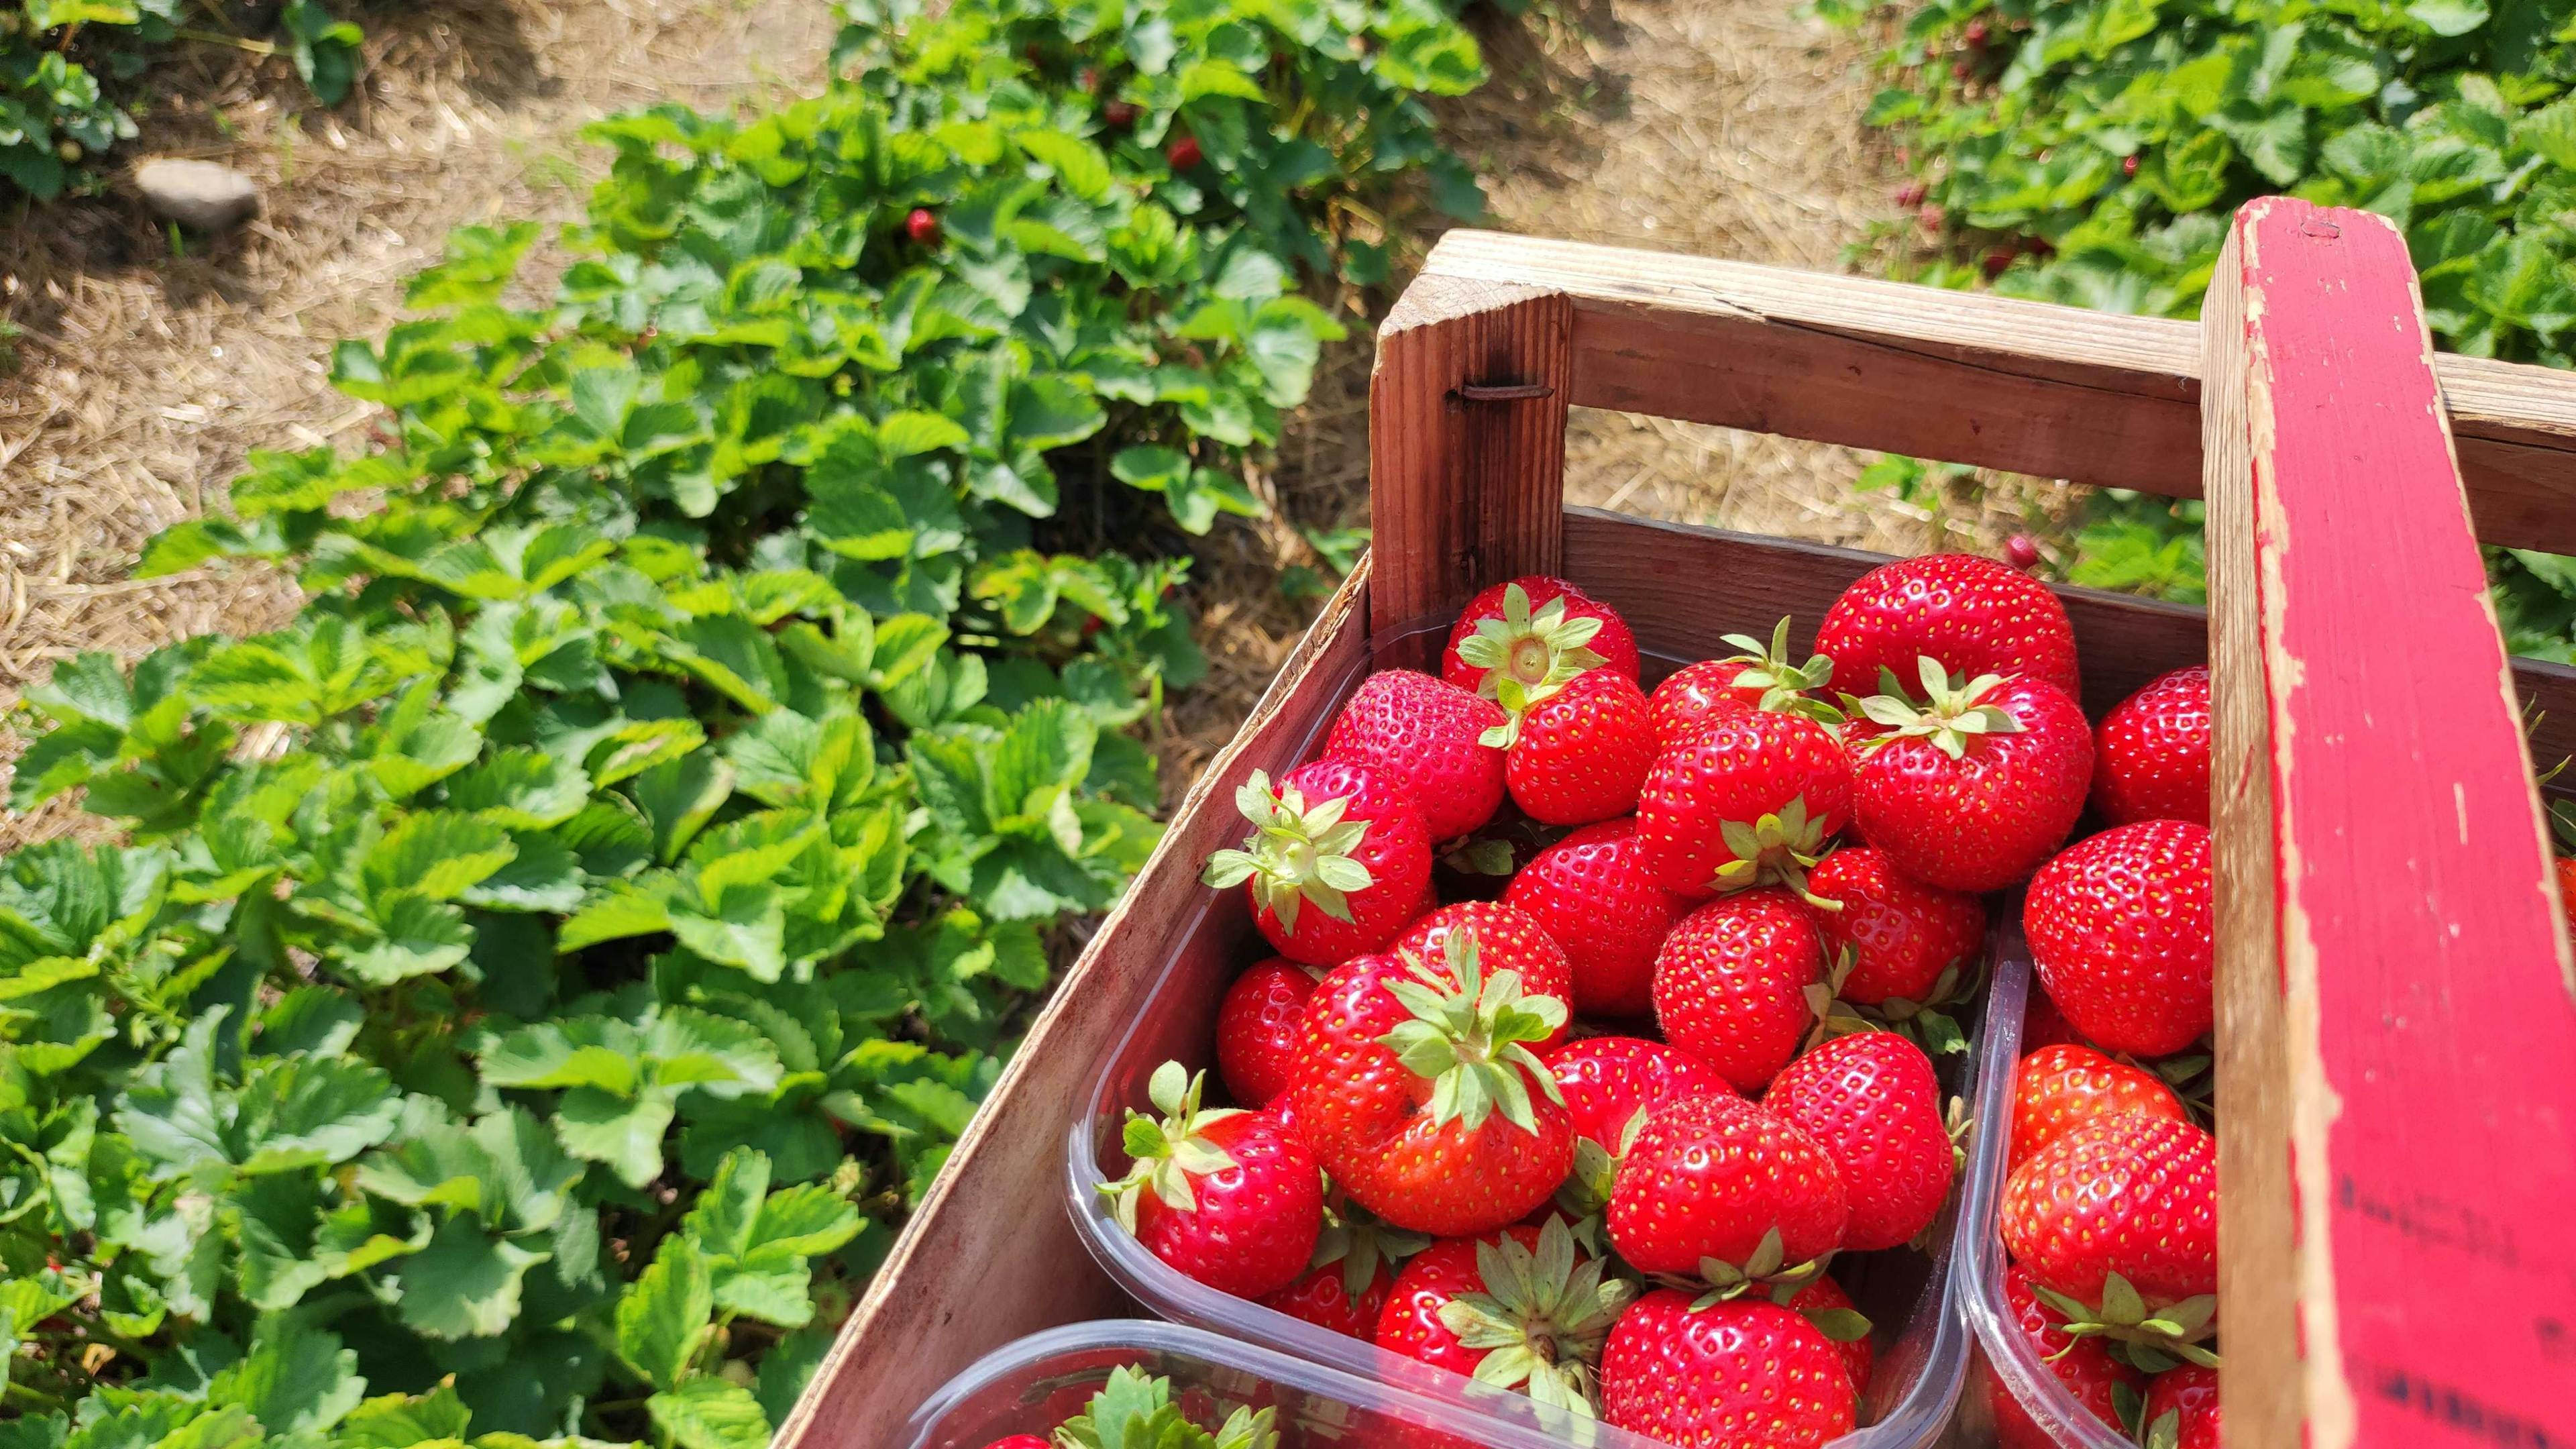 Pick-your-own Swedish strawberries